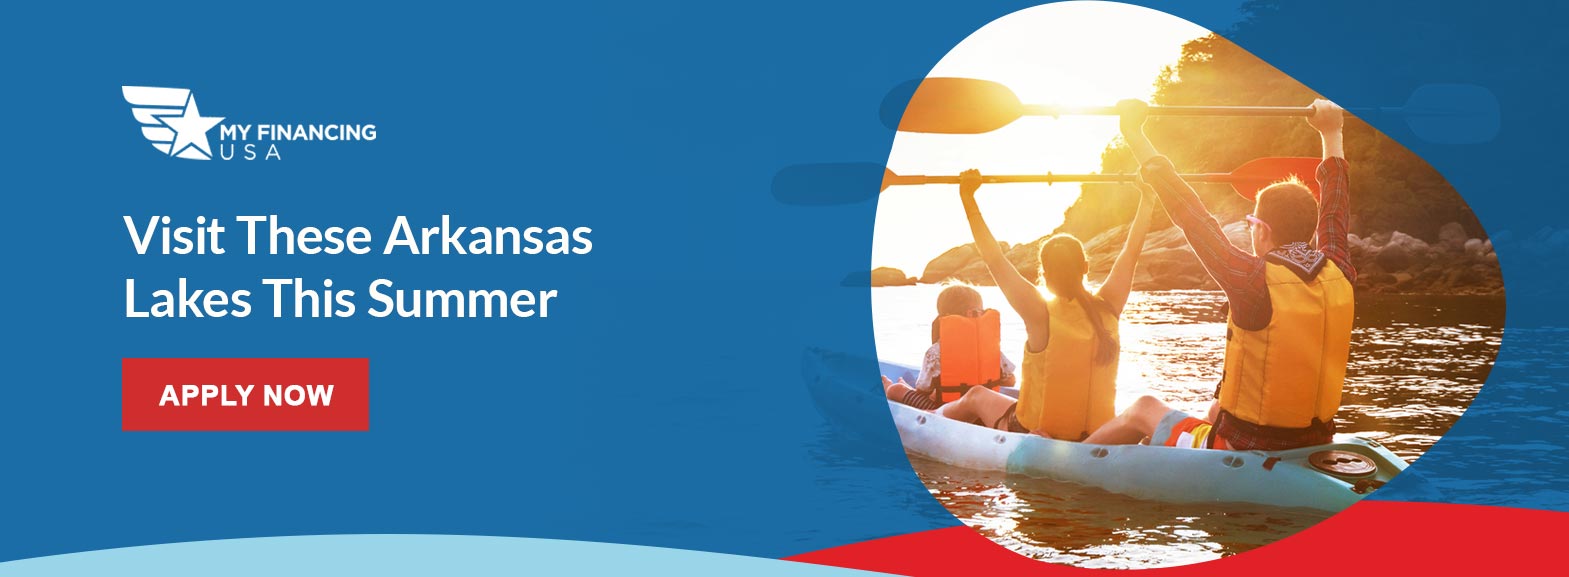 Visit These Arkansas Lakes This Summer. Apply now!